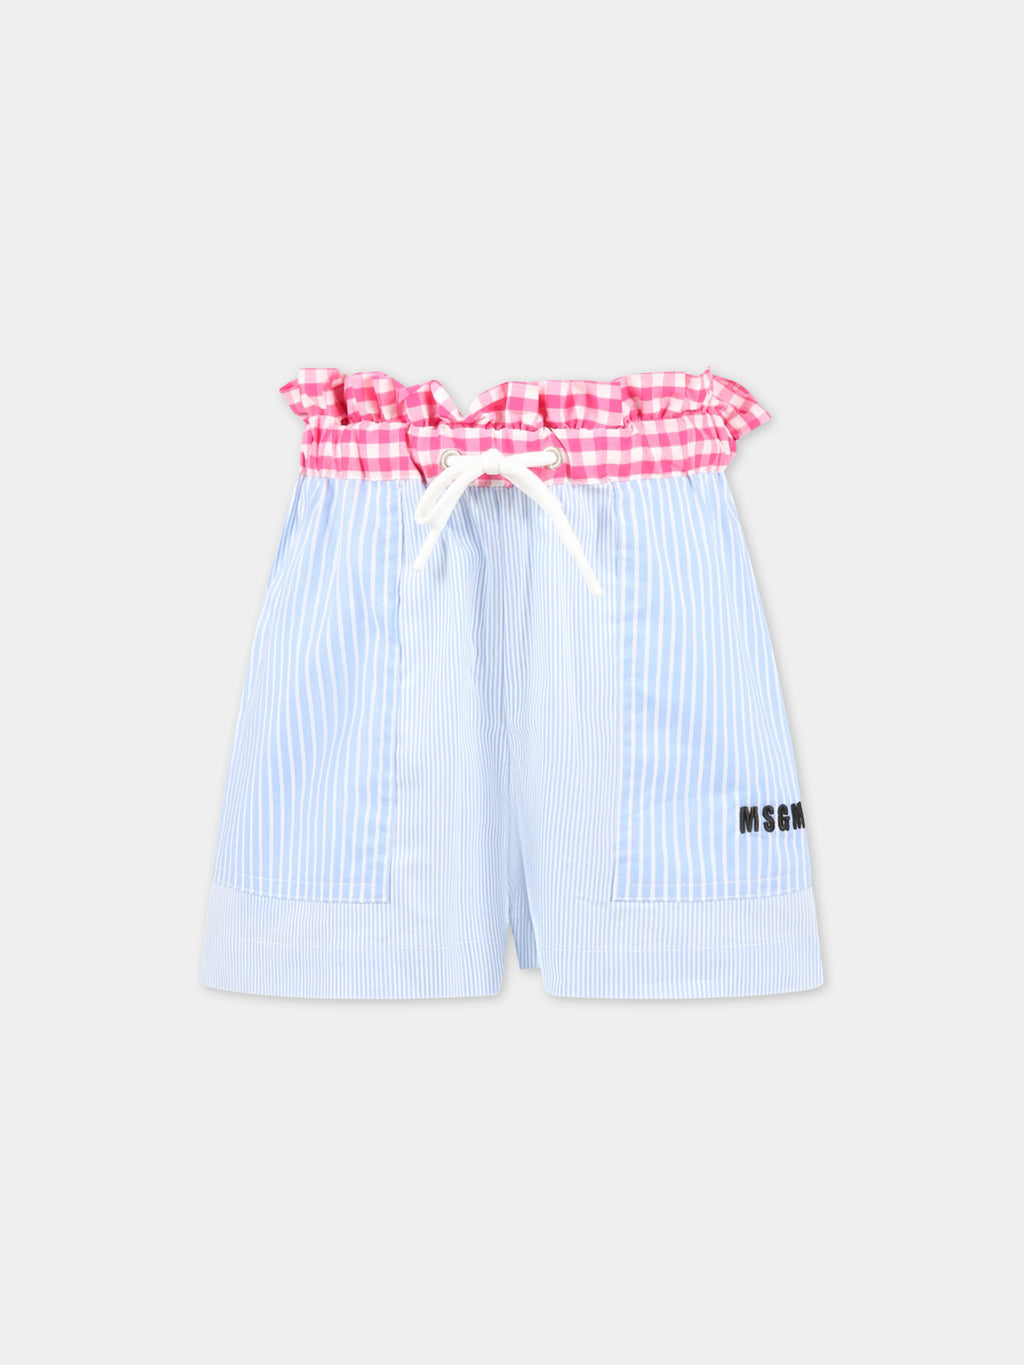 Multicolor shorts for girl with black logo